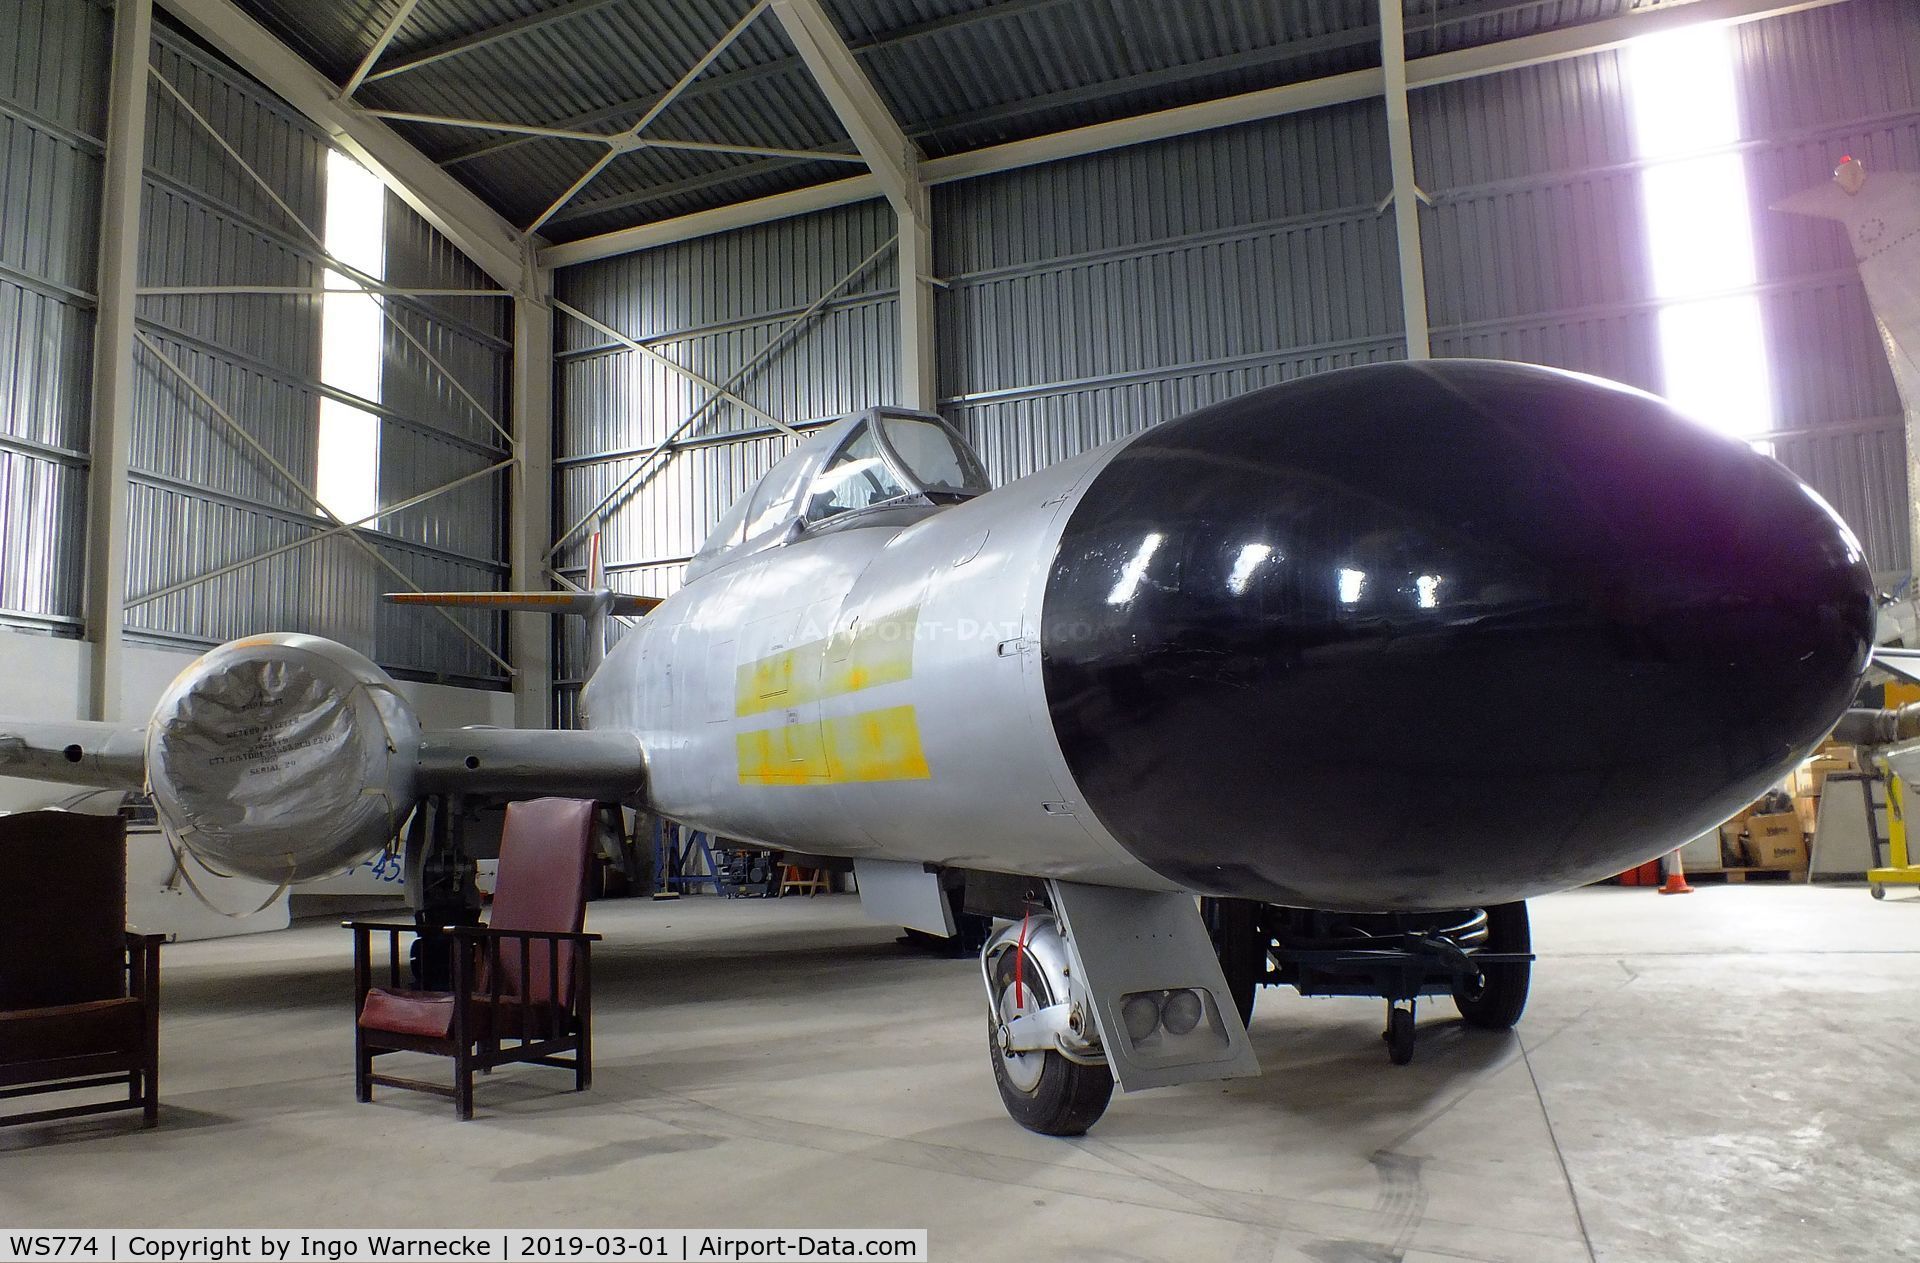 WS774, 1954 Gloster Meteor NF(T).14 C/N Not found WS774, Gloster (Armstrong Whitworth) Meteor NF(T)14 at the Malta Aviation Museum, Ta' Qali